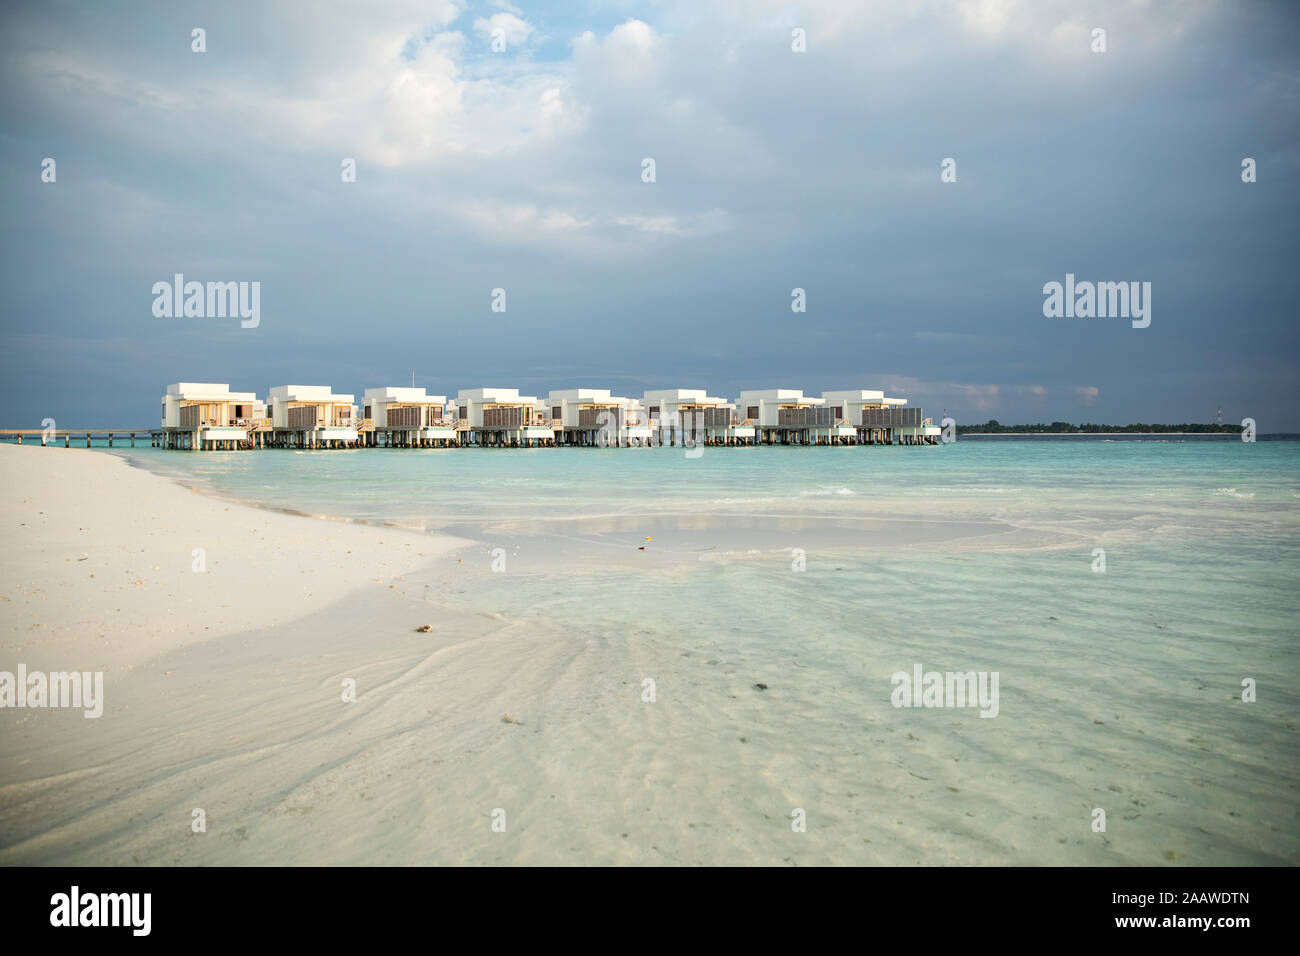 View of villas over sea against cloudy sky at Maldives Stock Photo